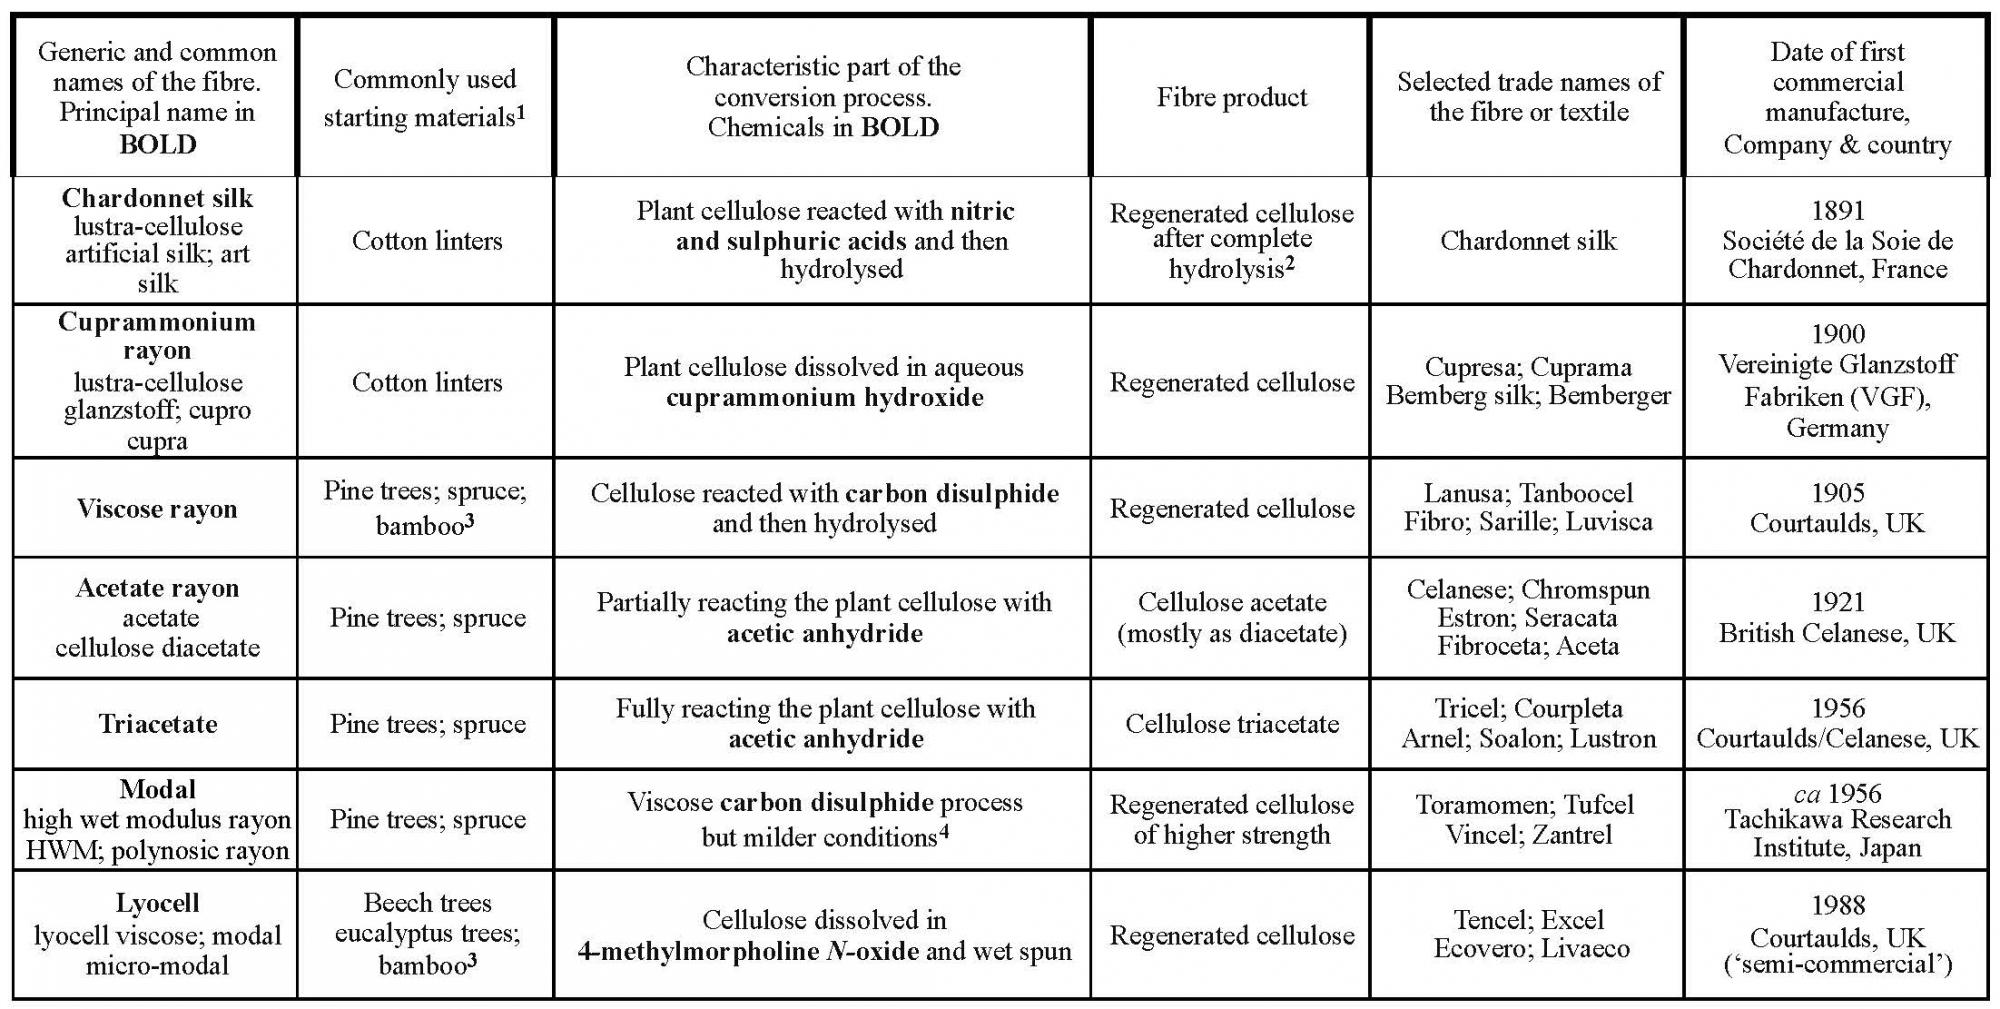 A table showing cellulose-derived fibres